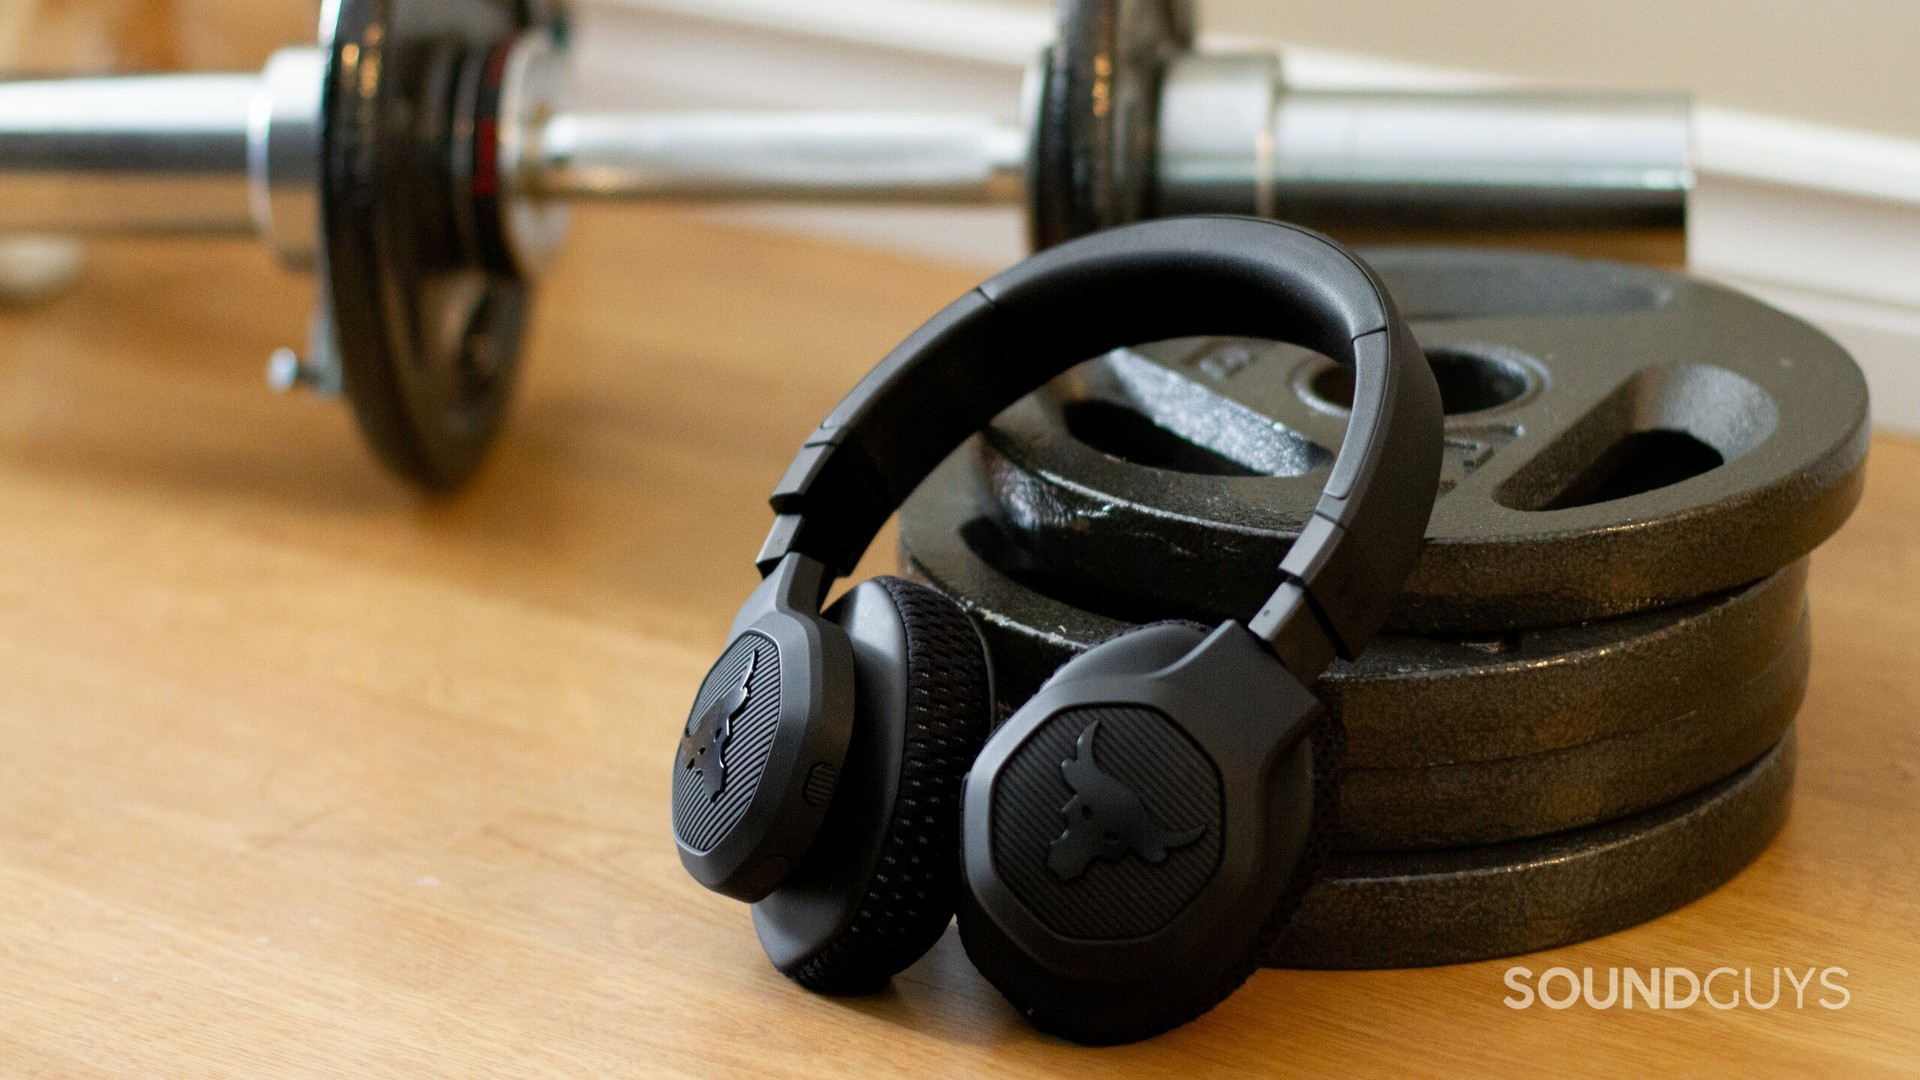 UA and JBL's Project Rock headphones leaning against weights